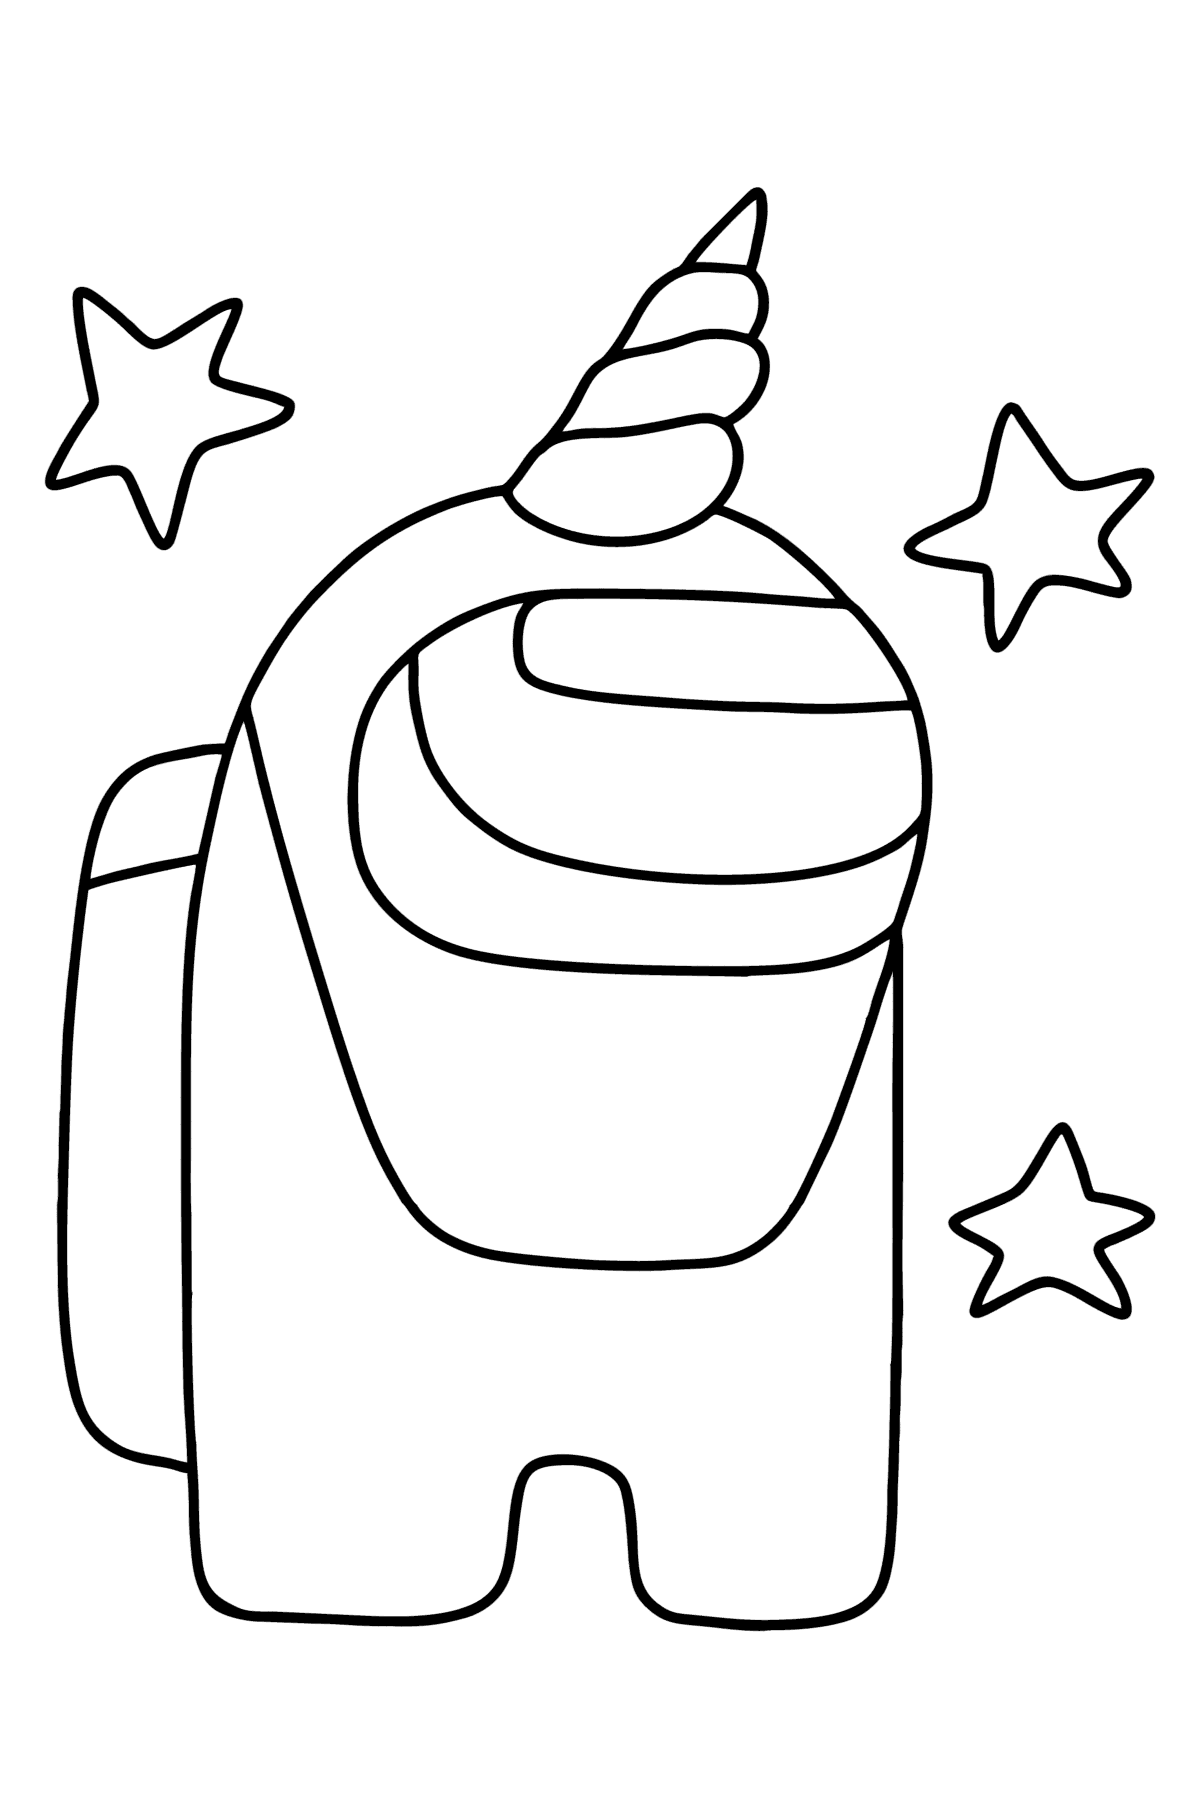 Us coloring page among